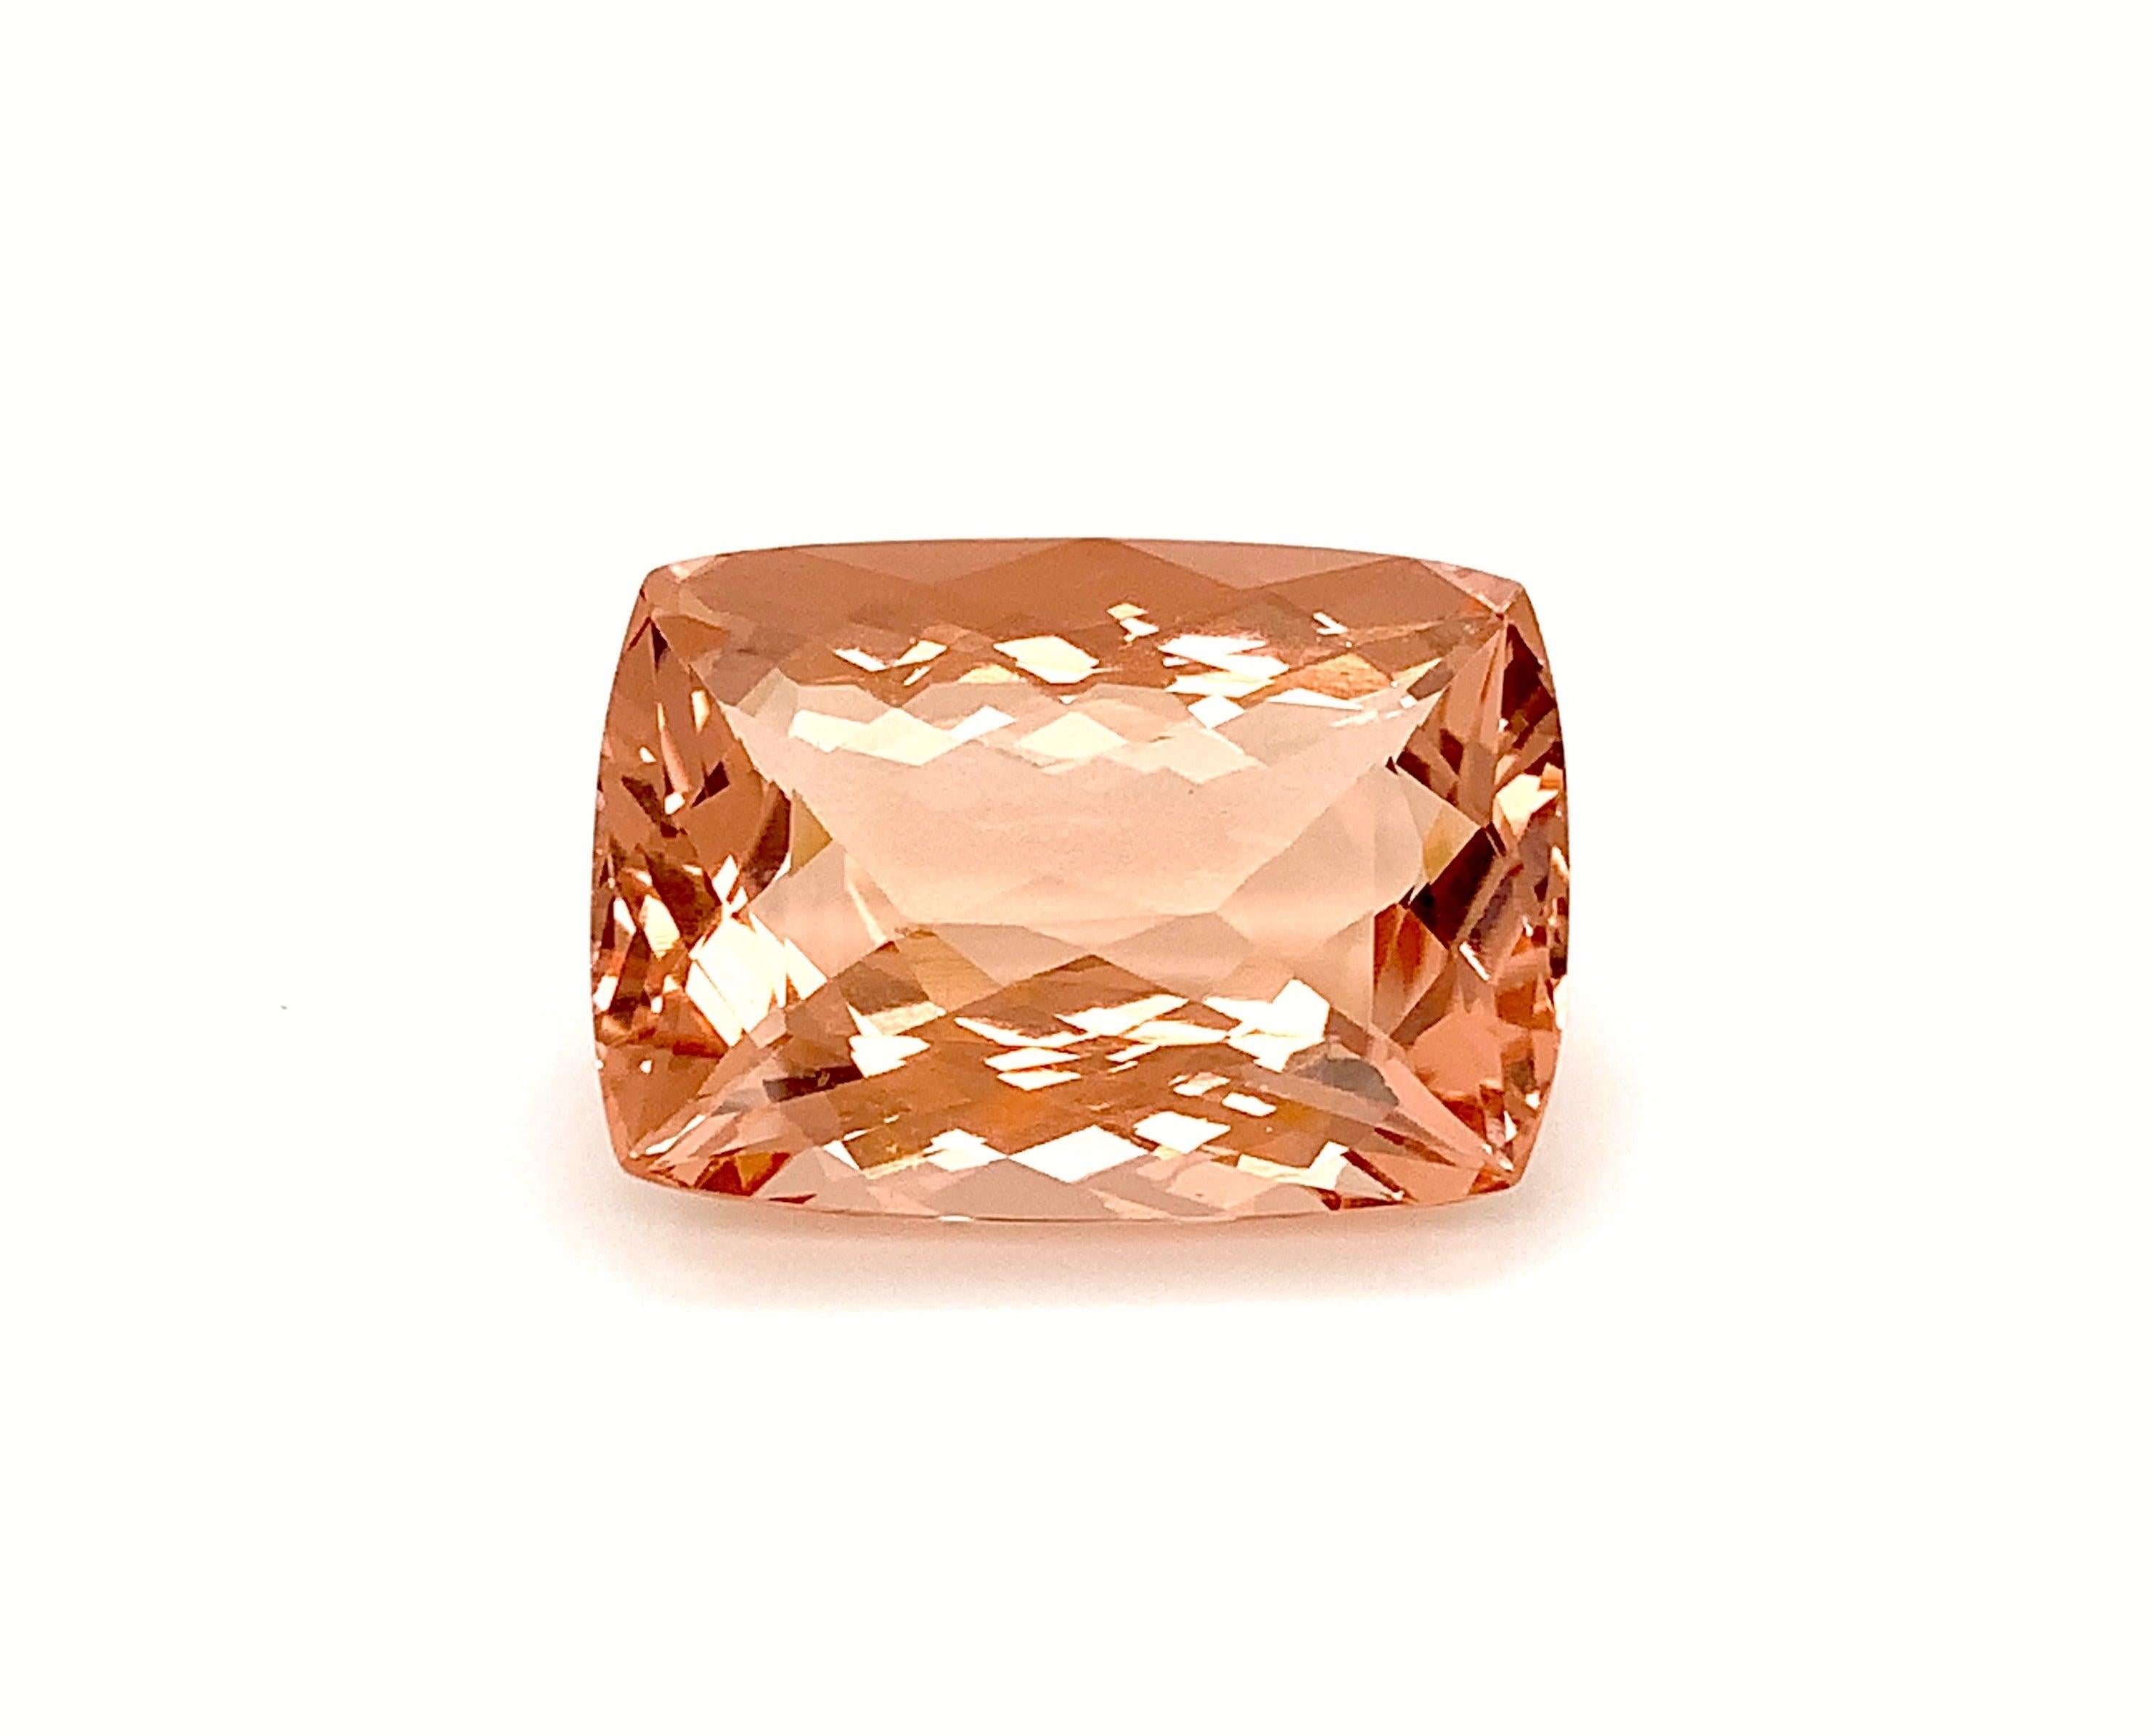 Express yourself with Pantone's 2024 Color of The Year, fuzzy peach, by wearing this beautiful morganite gemstone! Exceptional and rare because of its large size, crystalline clarity, and the gorgeous peach color that is highly-prized by collectors,